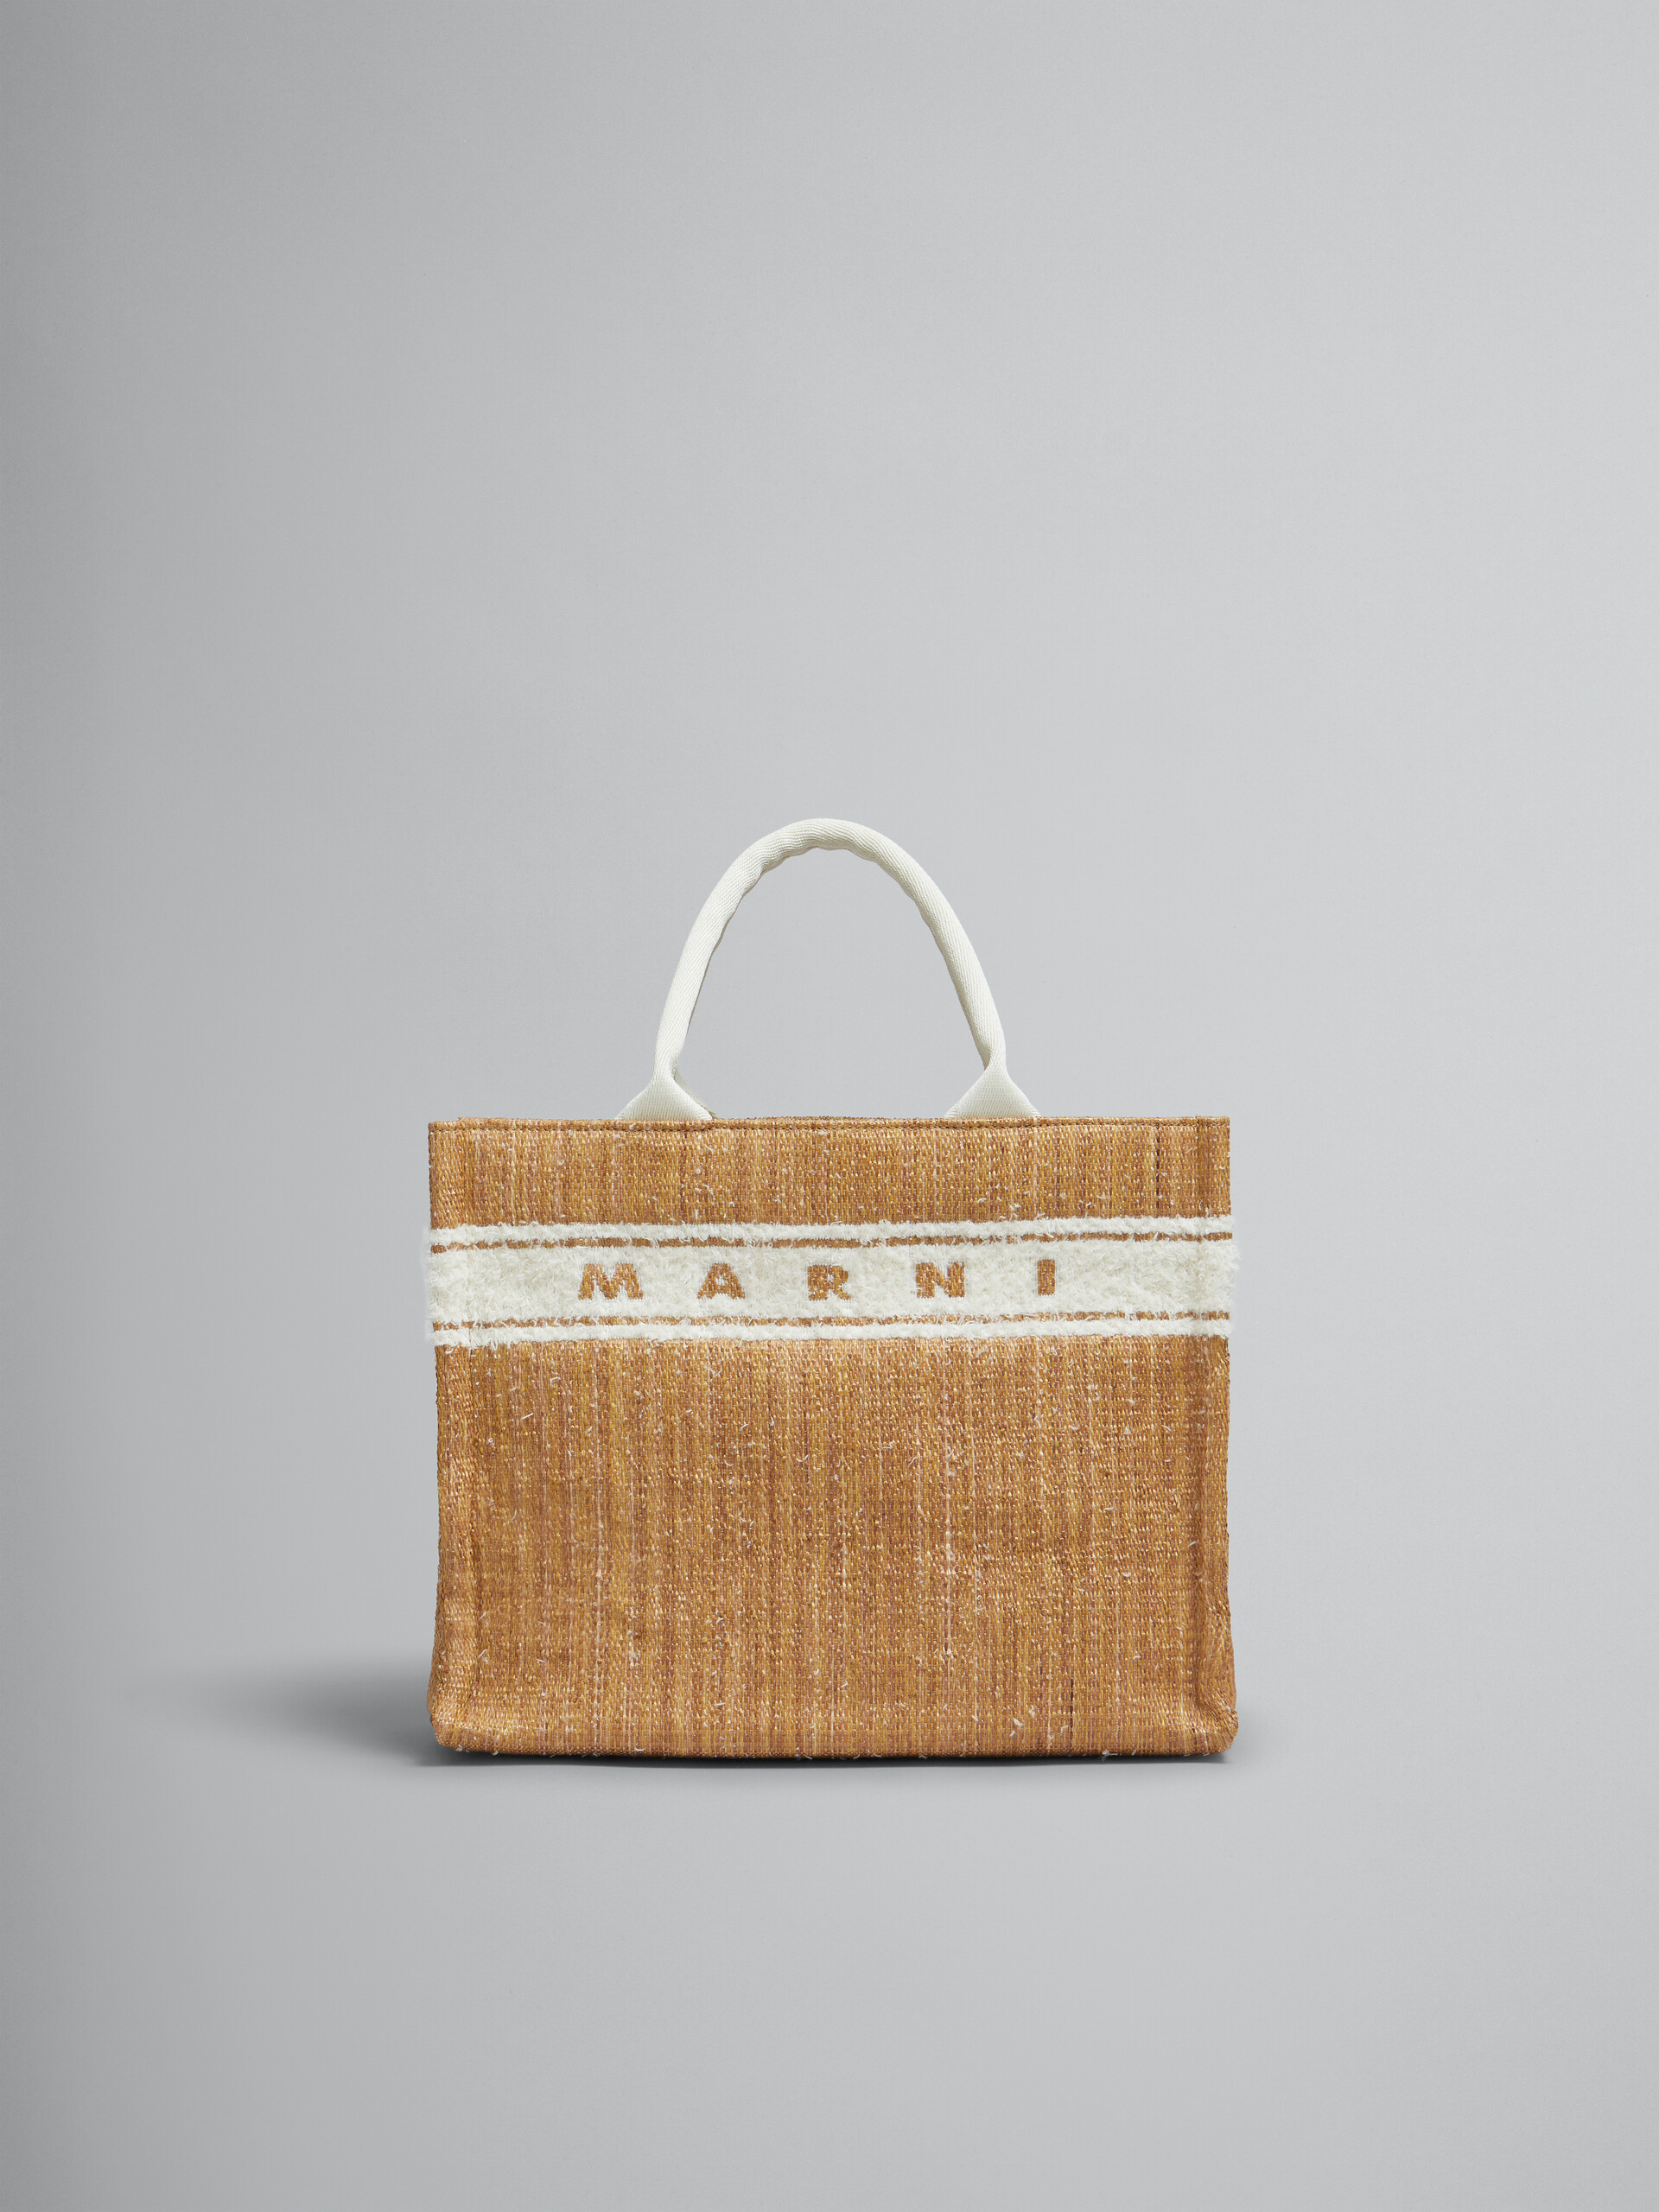 Ecru raffia-effect Small Tote Bag with tufted logo - Shopping Bags - Image 1